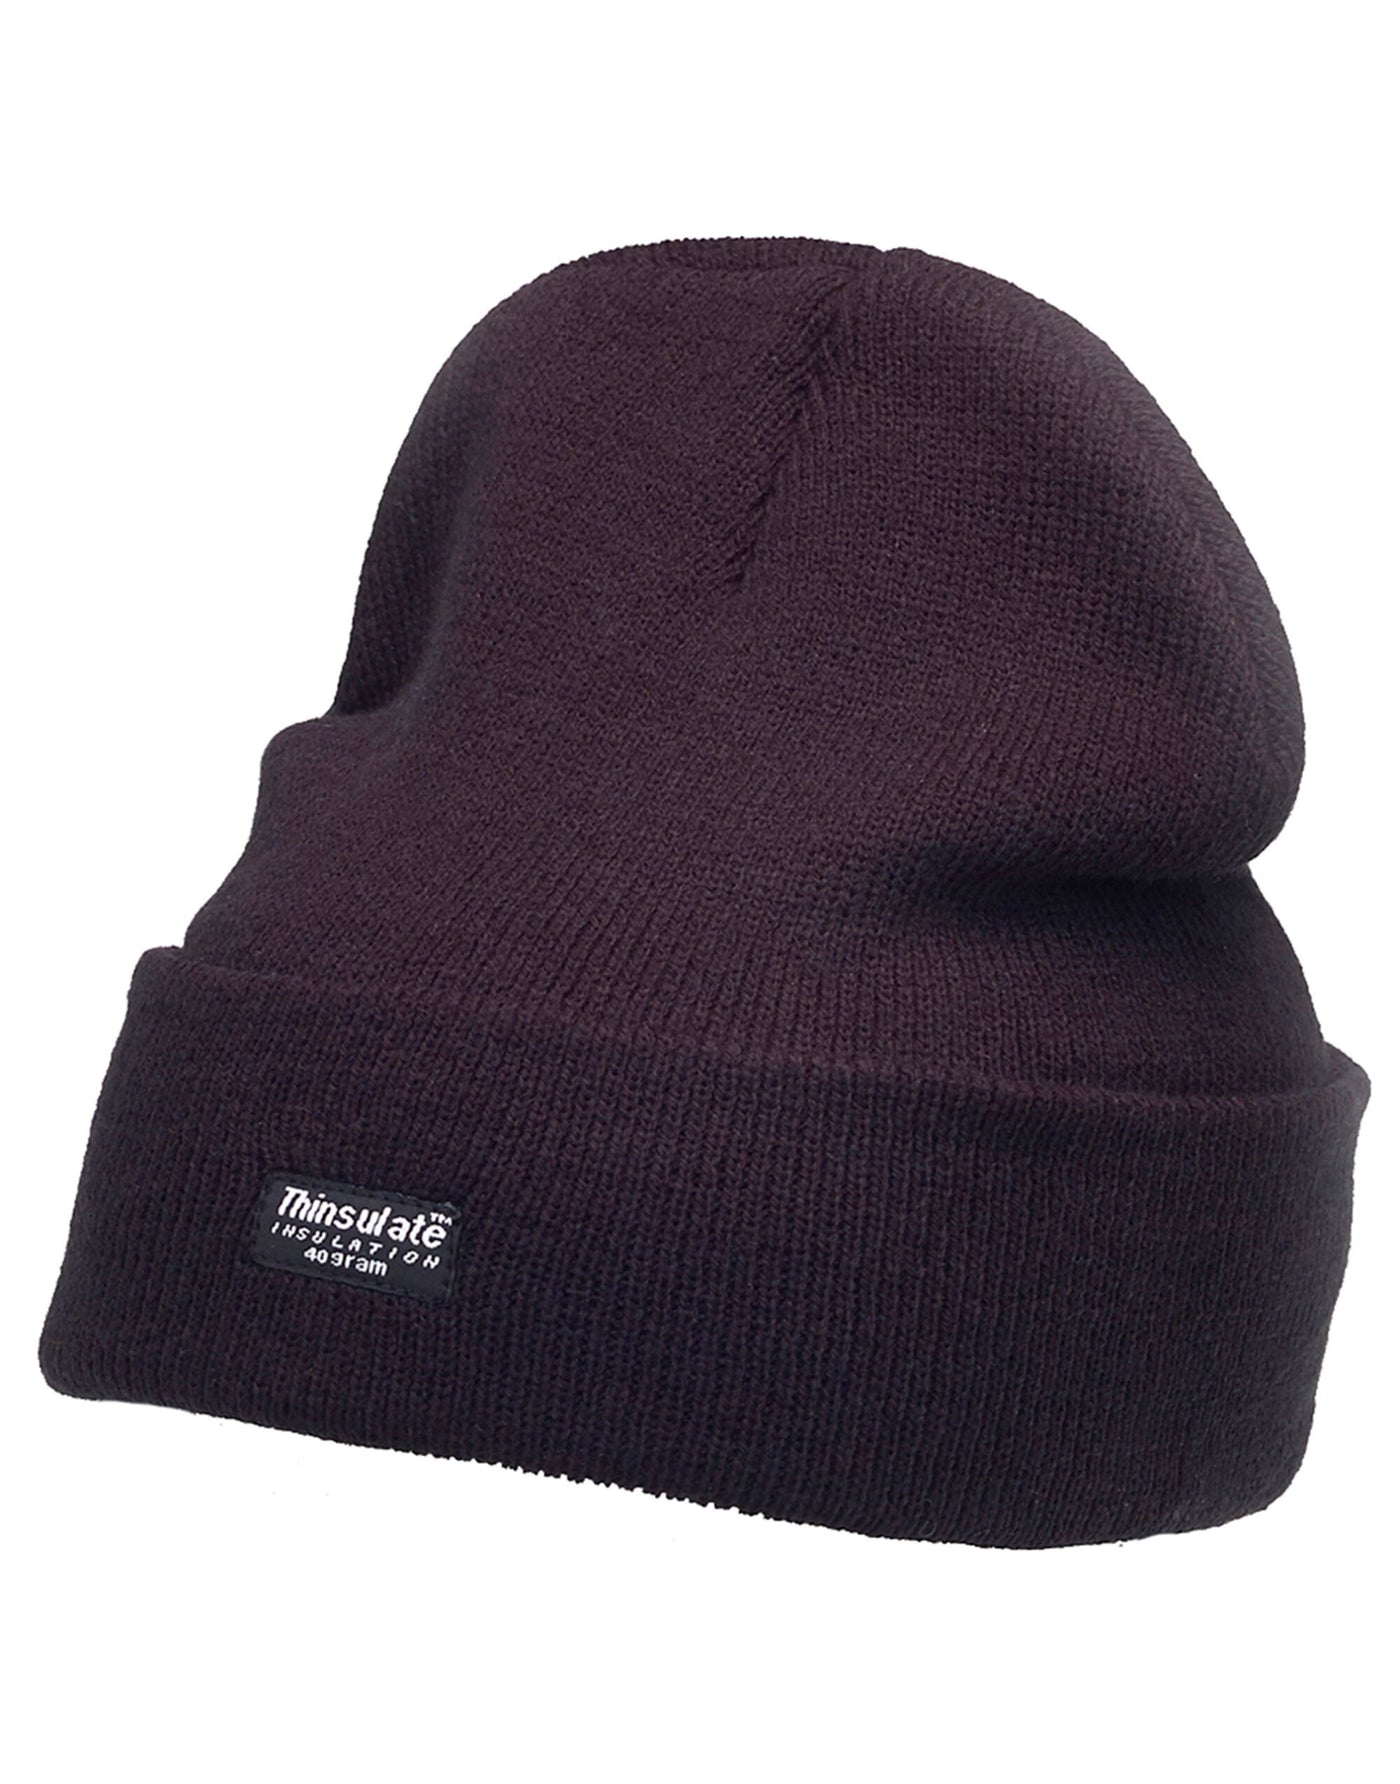 Black Thinsulate Knitted Hat